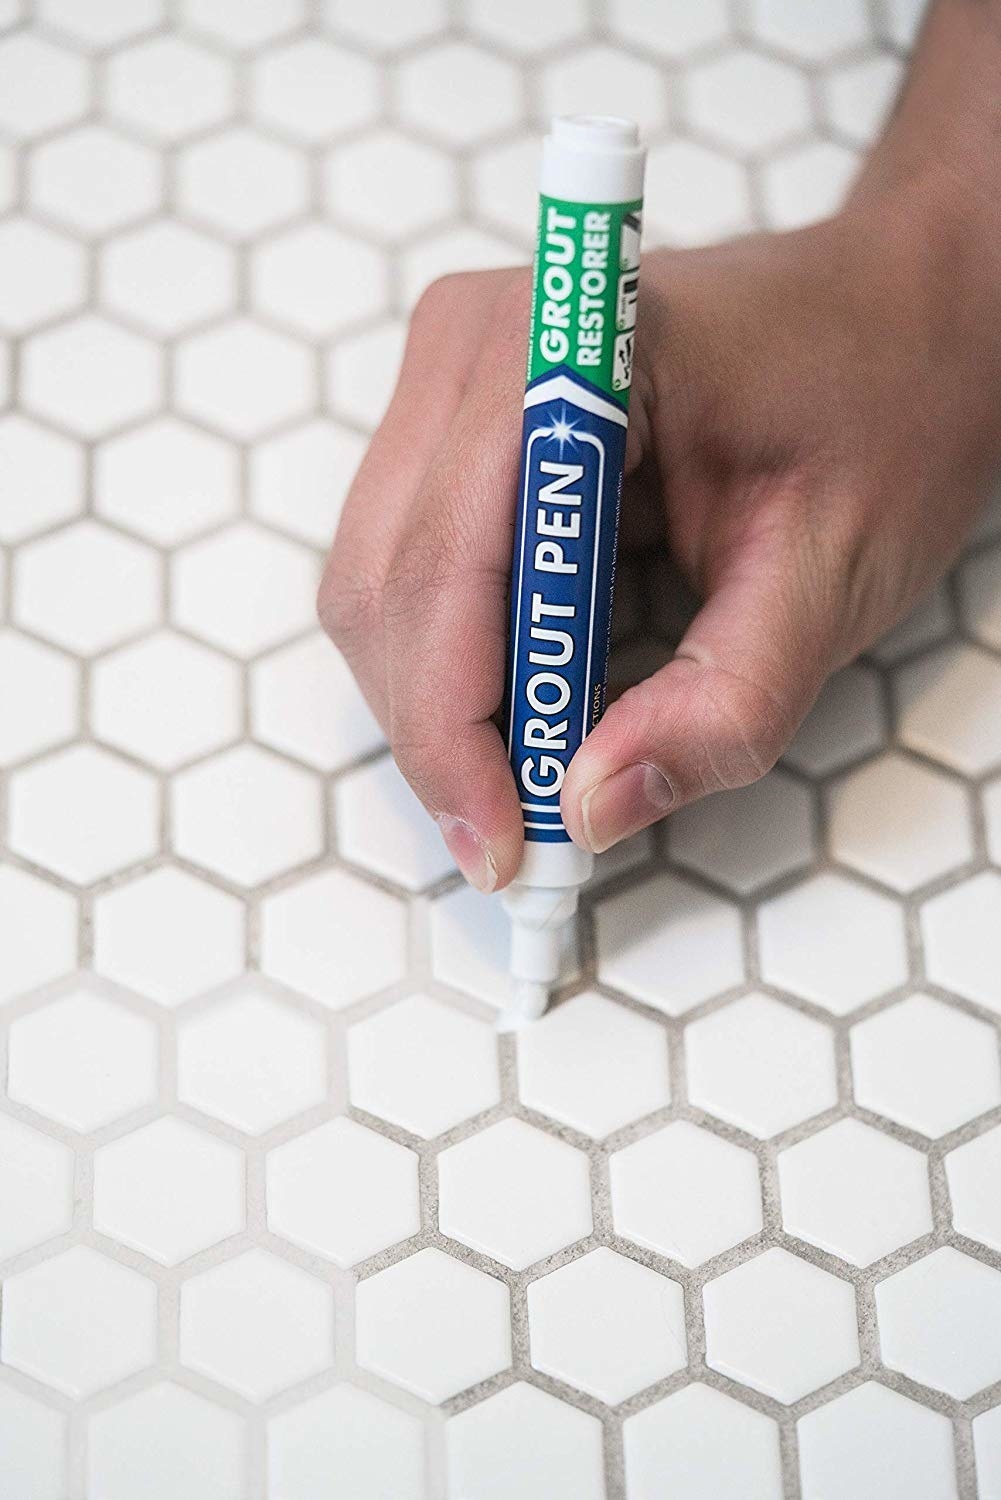 grout pen covering the grout with white pen